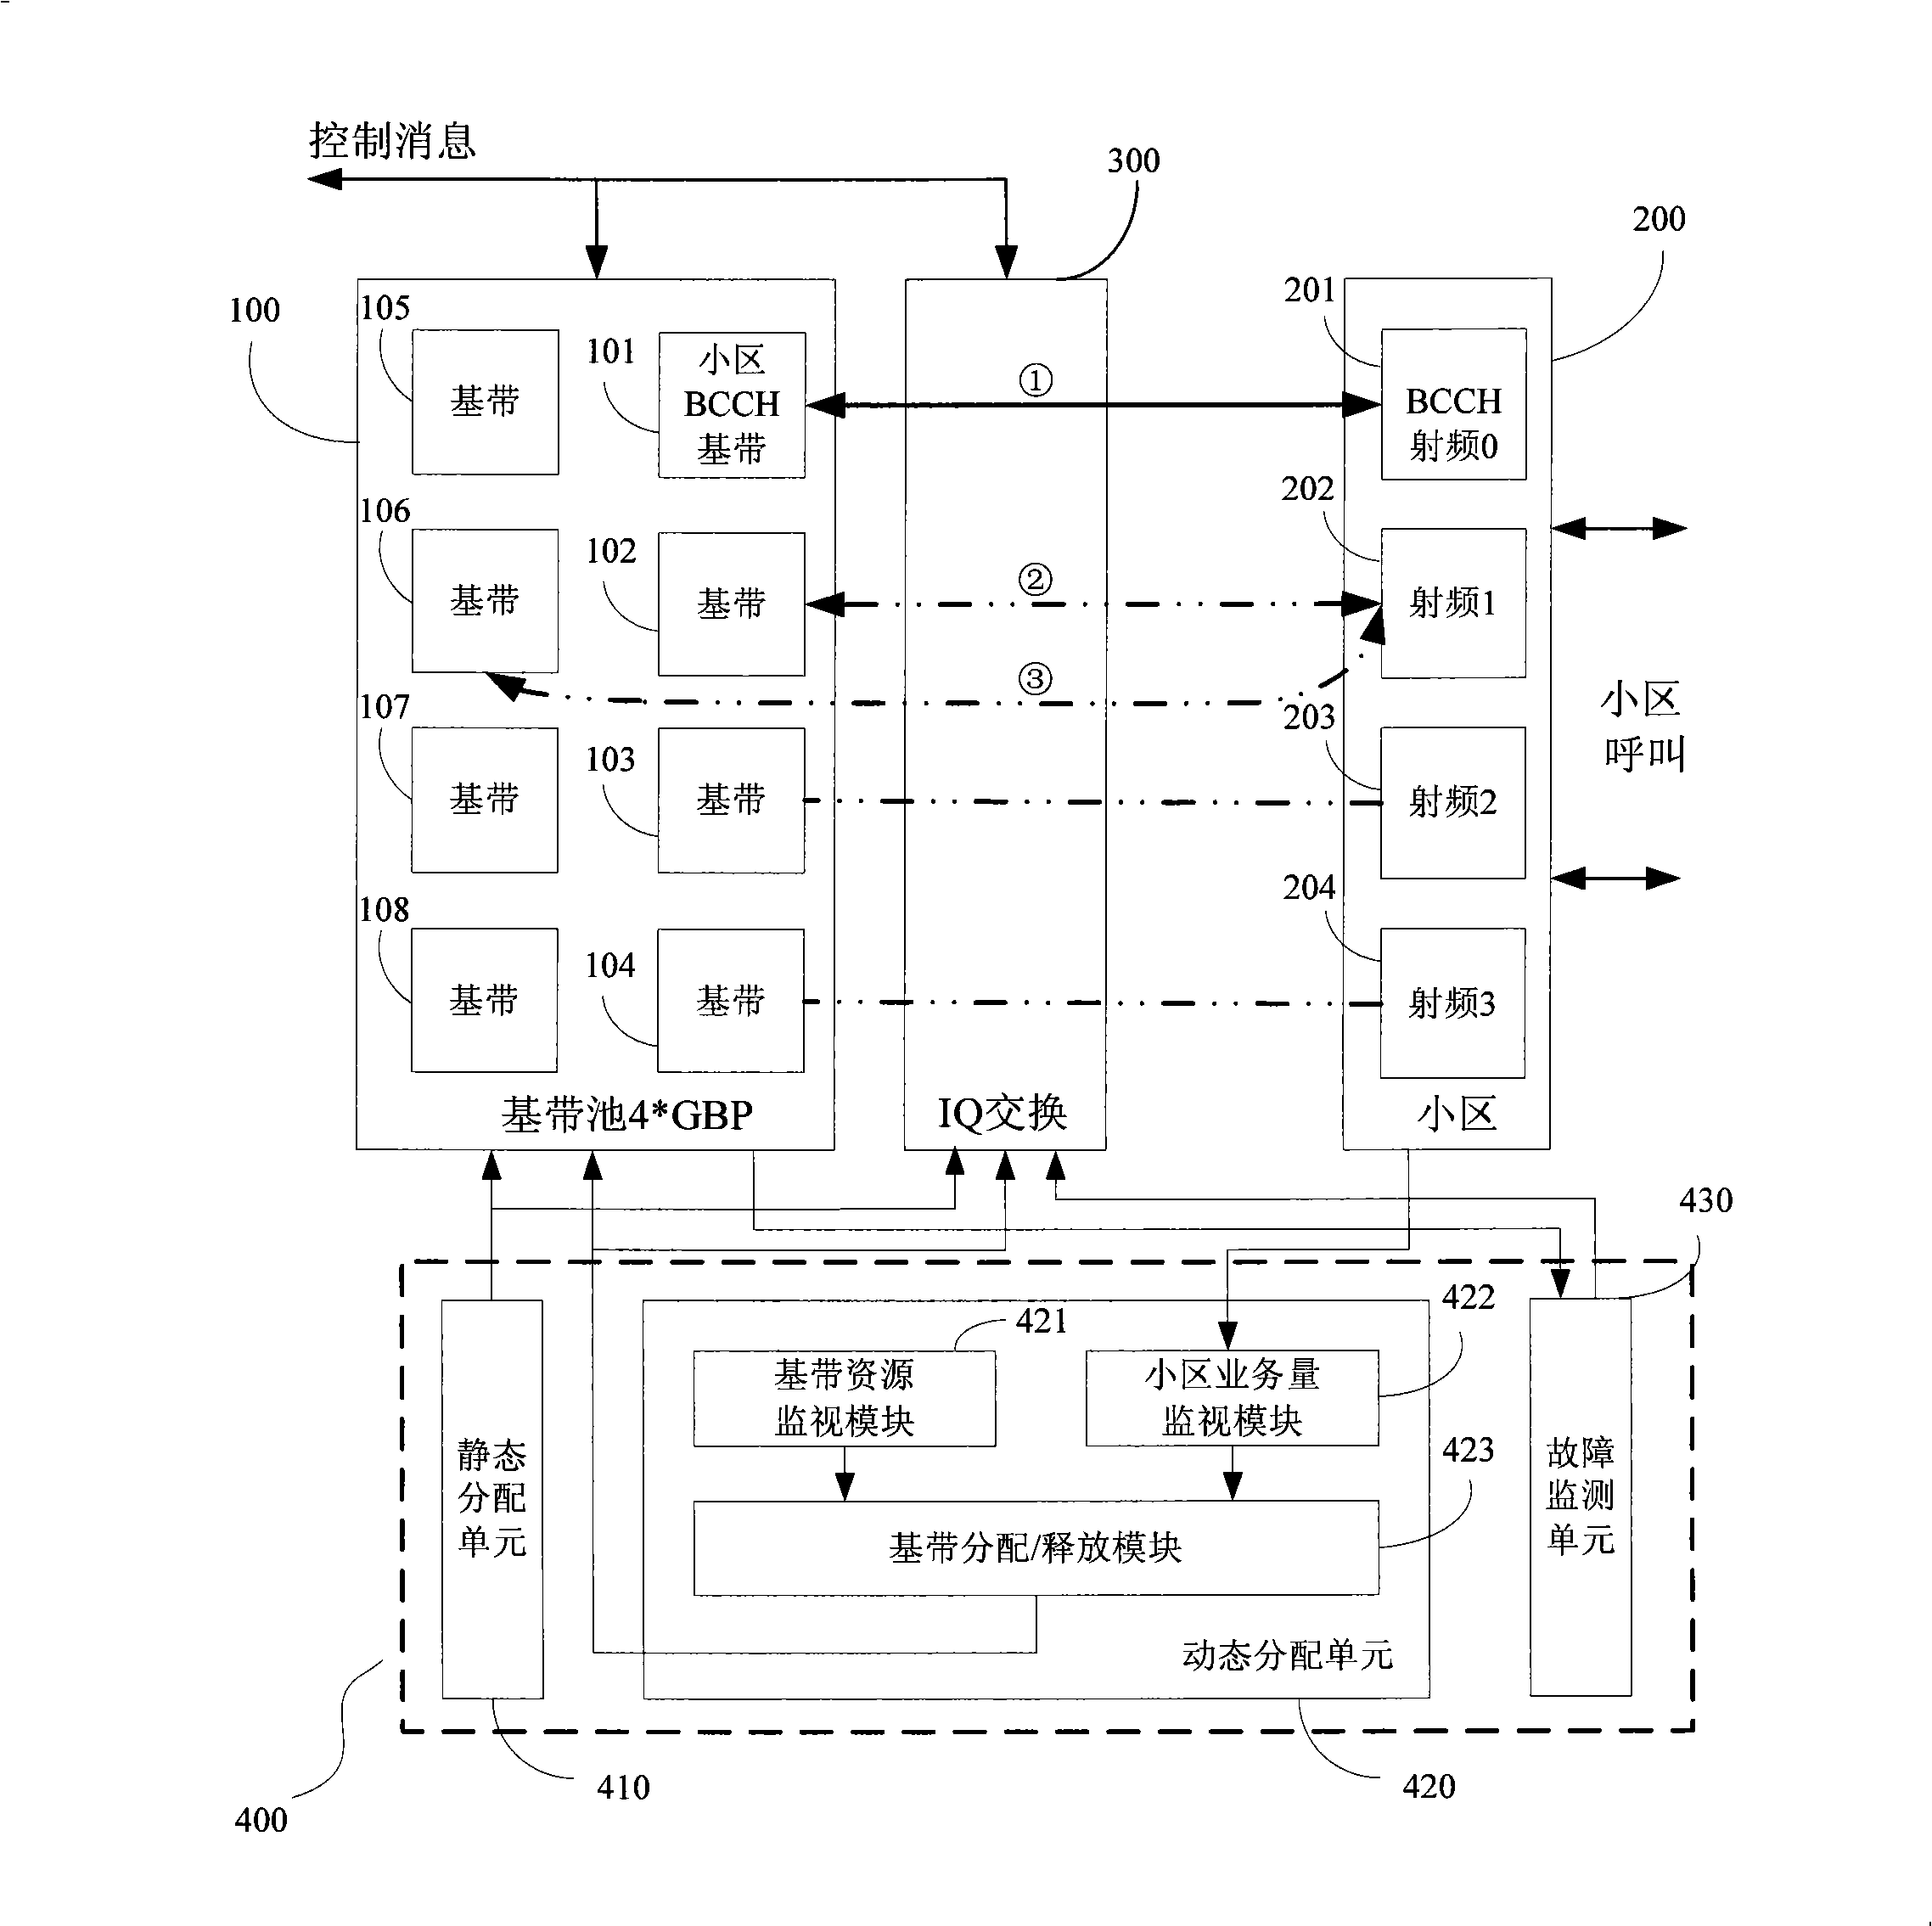 Method and system for managing baseband resource pool of global mobile communication system